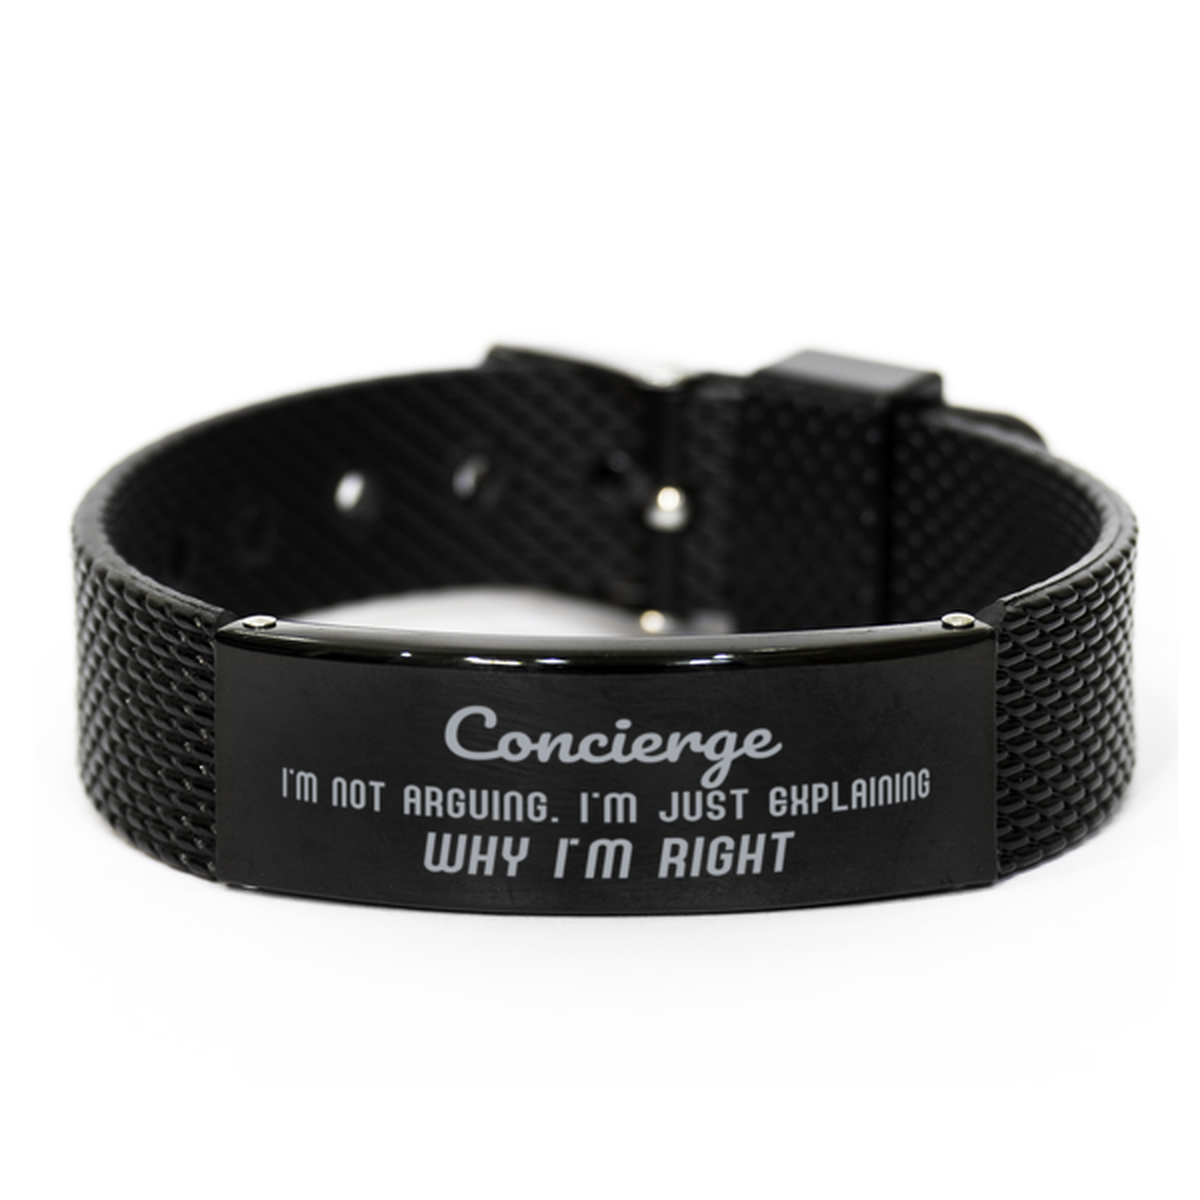 Concierge I'm not Arguing. I'm Just Explaining Why I'm RIGHT Black Shark Mesh Bracelet, Funny Saying Quote Concierge Gifts For Concierge Graduation Birthday Christmas Gifts for Men Women Coworker